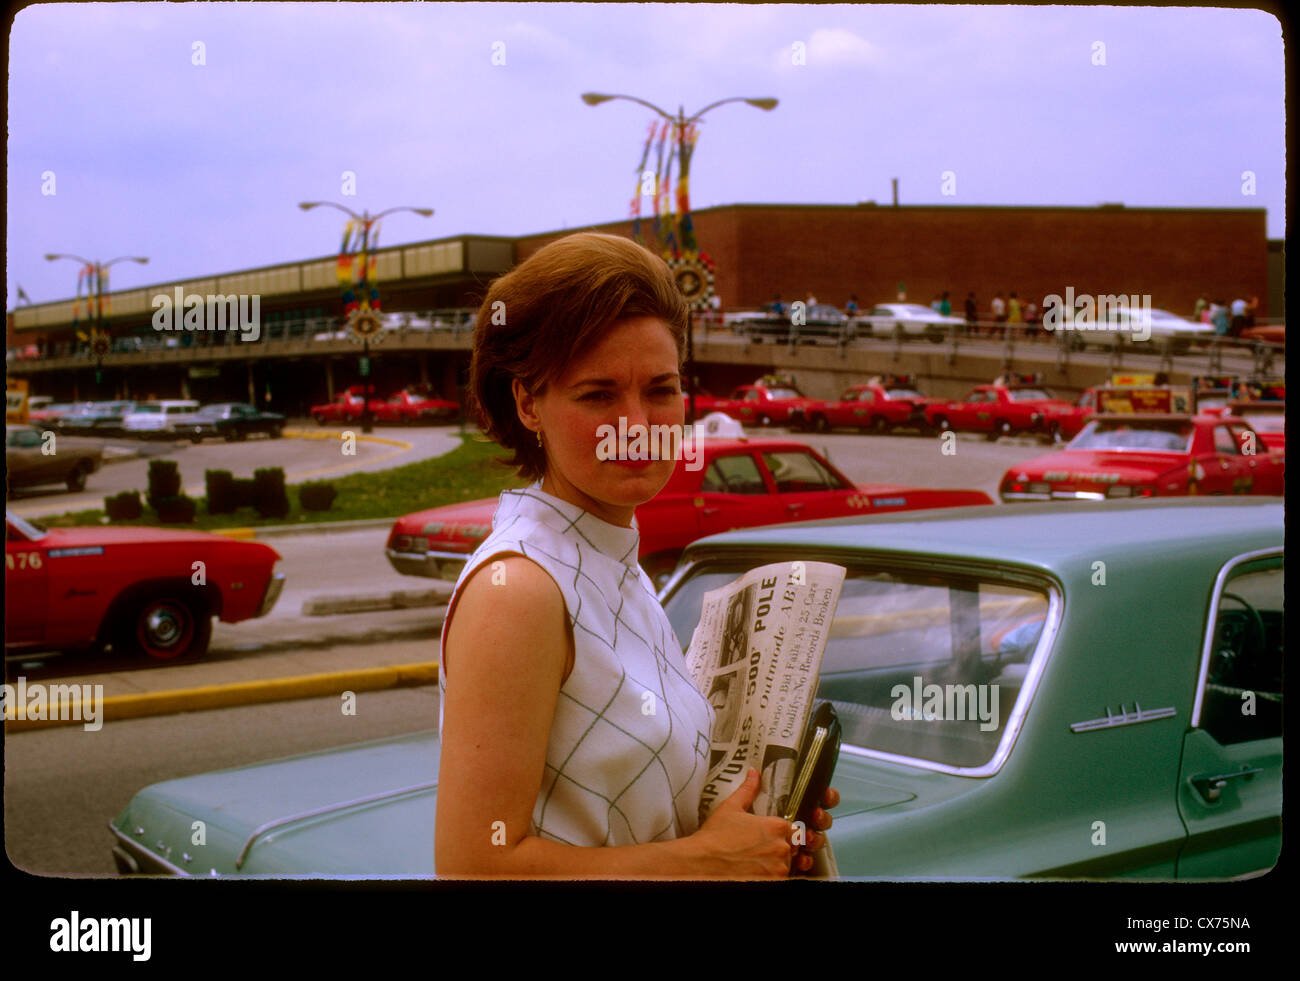 woman waiting at indianapolis airport holding indianapolis star newspaper may 1968 pole winner portrait taxis cars Stock Photo